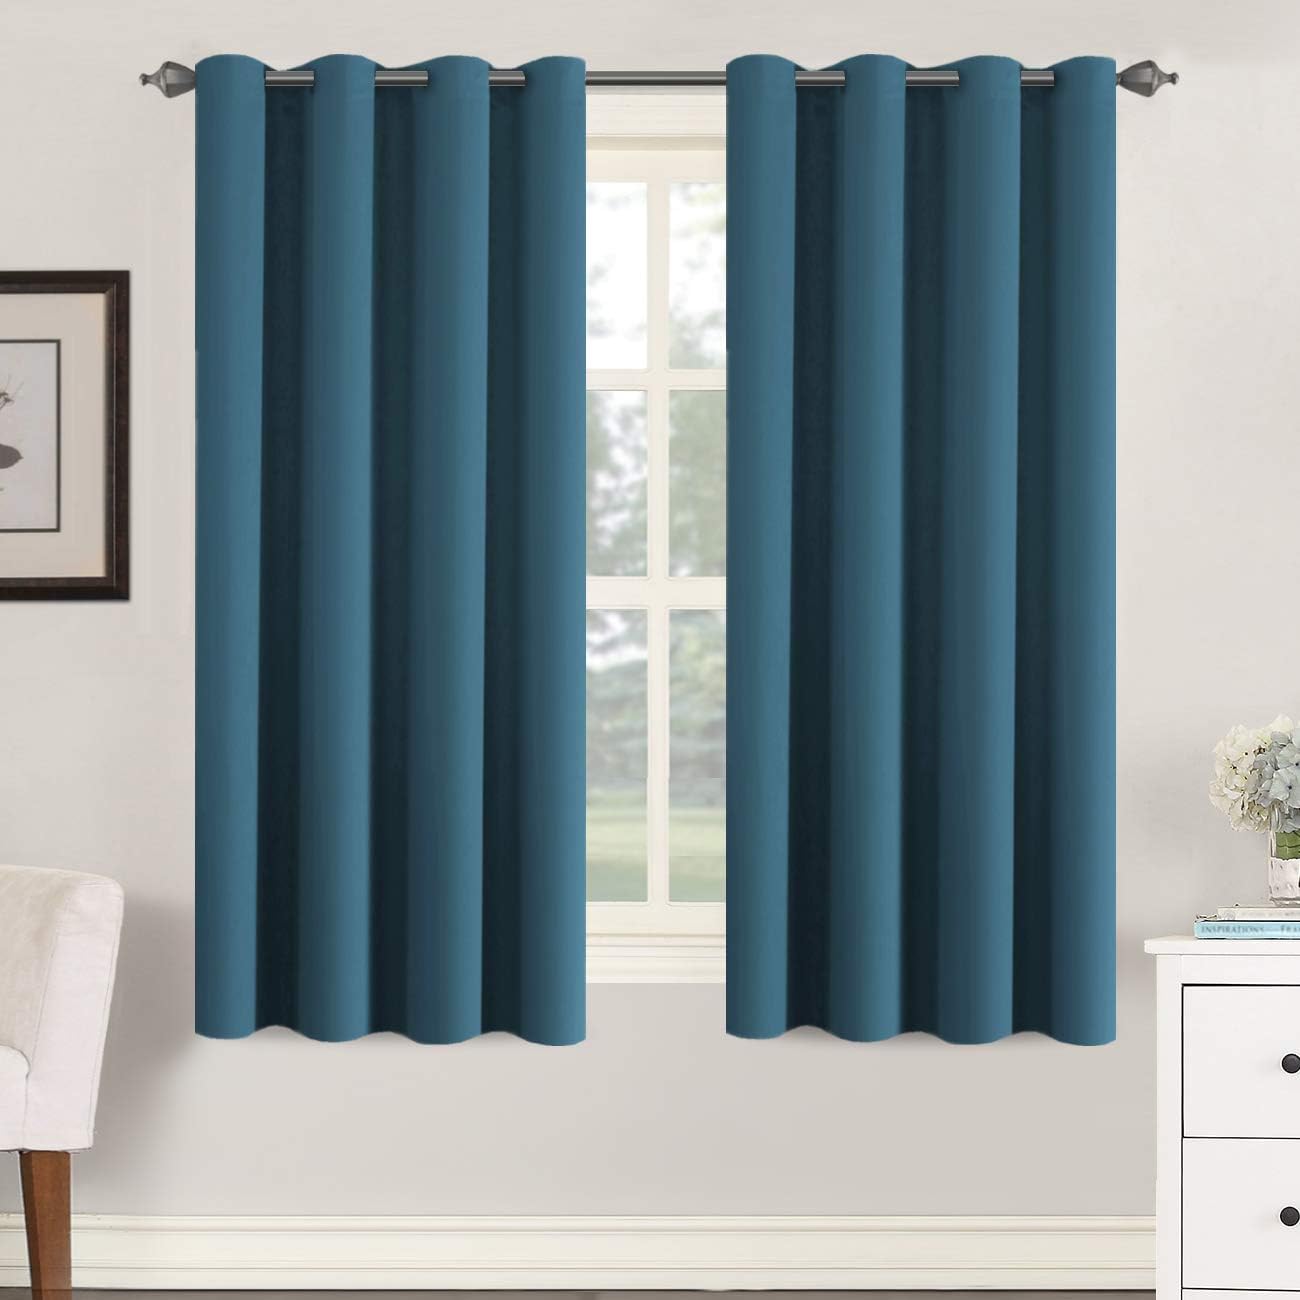 teal curtains living room